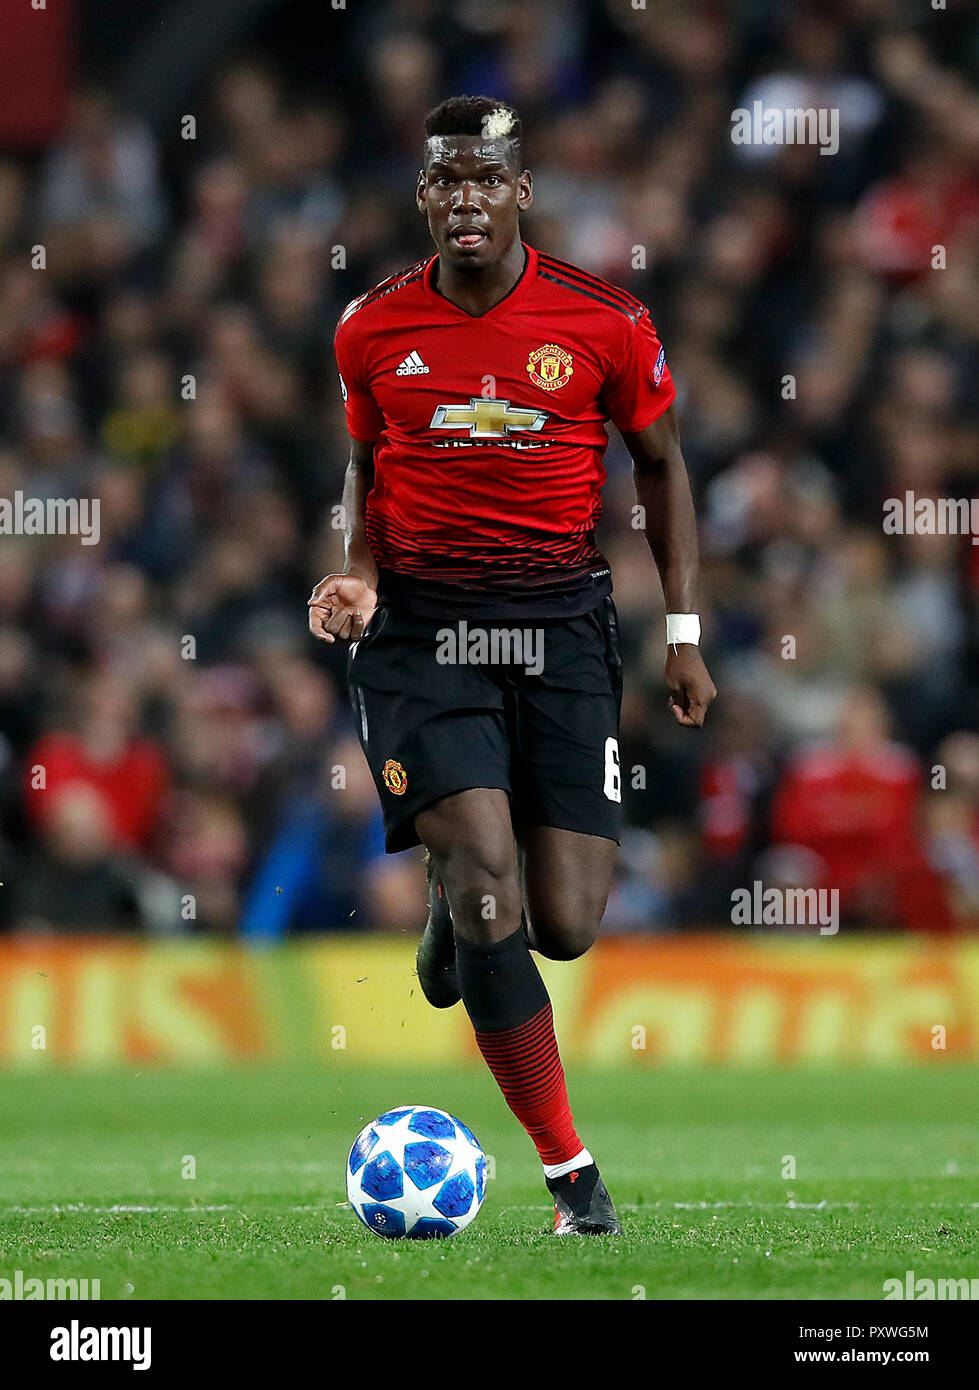 Manchester United's Paul Pogba during the UEFA Champions League match at Old Trafford, Manchester. PRESS ASSOCIATION Photo. Picture date: Tuesday October 23, 2018. See PA story SOCCER Man Utd. Photo credit should read: Martin Rickett/PA Wire Stock Photo